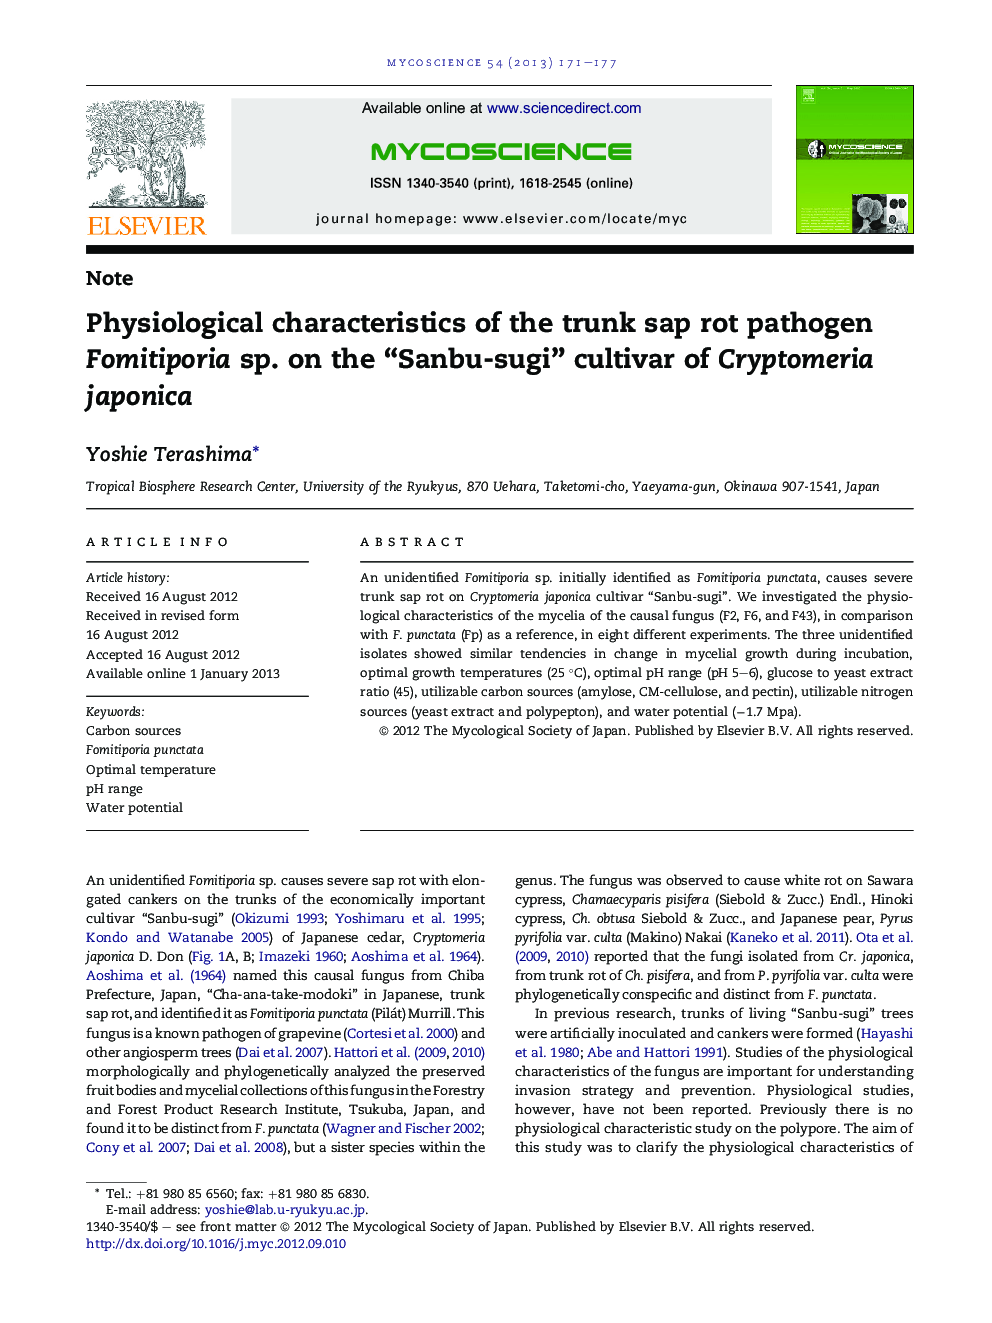 Physiological characteristics of the trunk sap rot pathogen Fomitiporia sp. on the “Sanbu-sugi” cultivar of Cryptomeria japonica